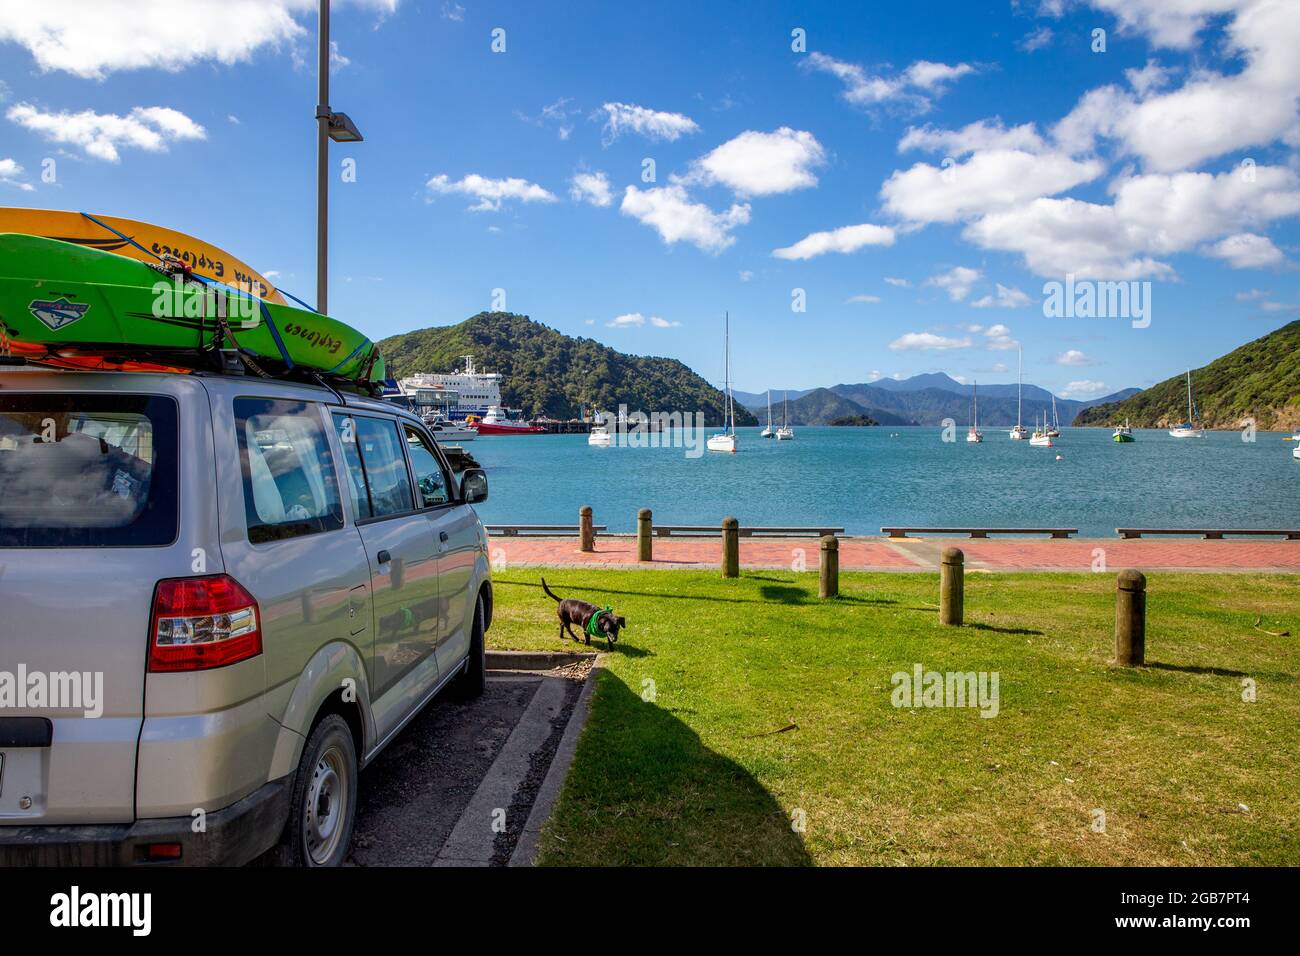 Picton, Marlborough, New Zealand, June 13 2021: Tourists in a campervan enjoy the view along the Picton waterfront while waiting to catch the ferry Stock Photo